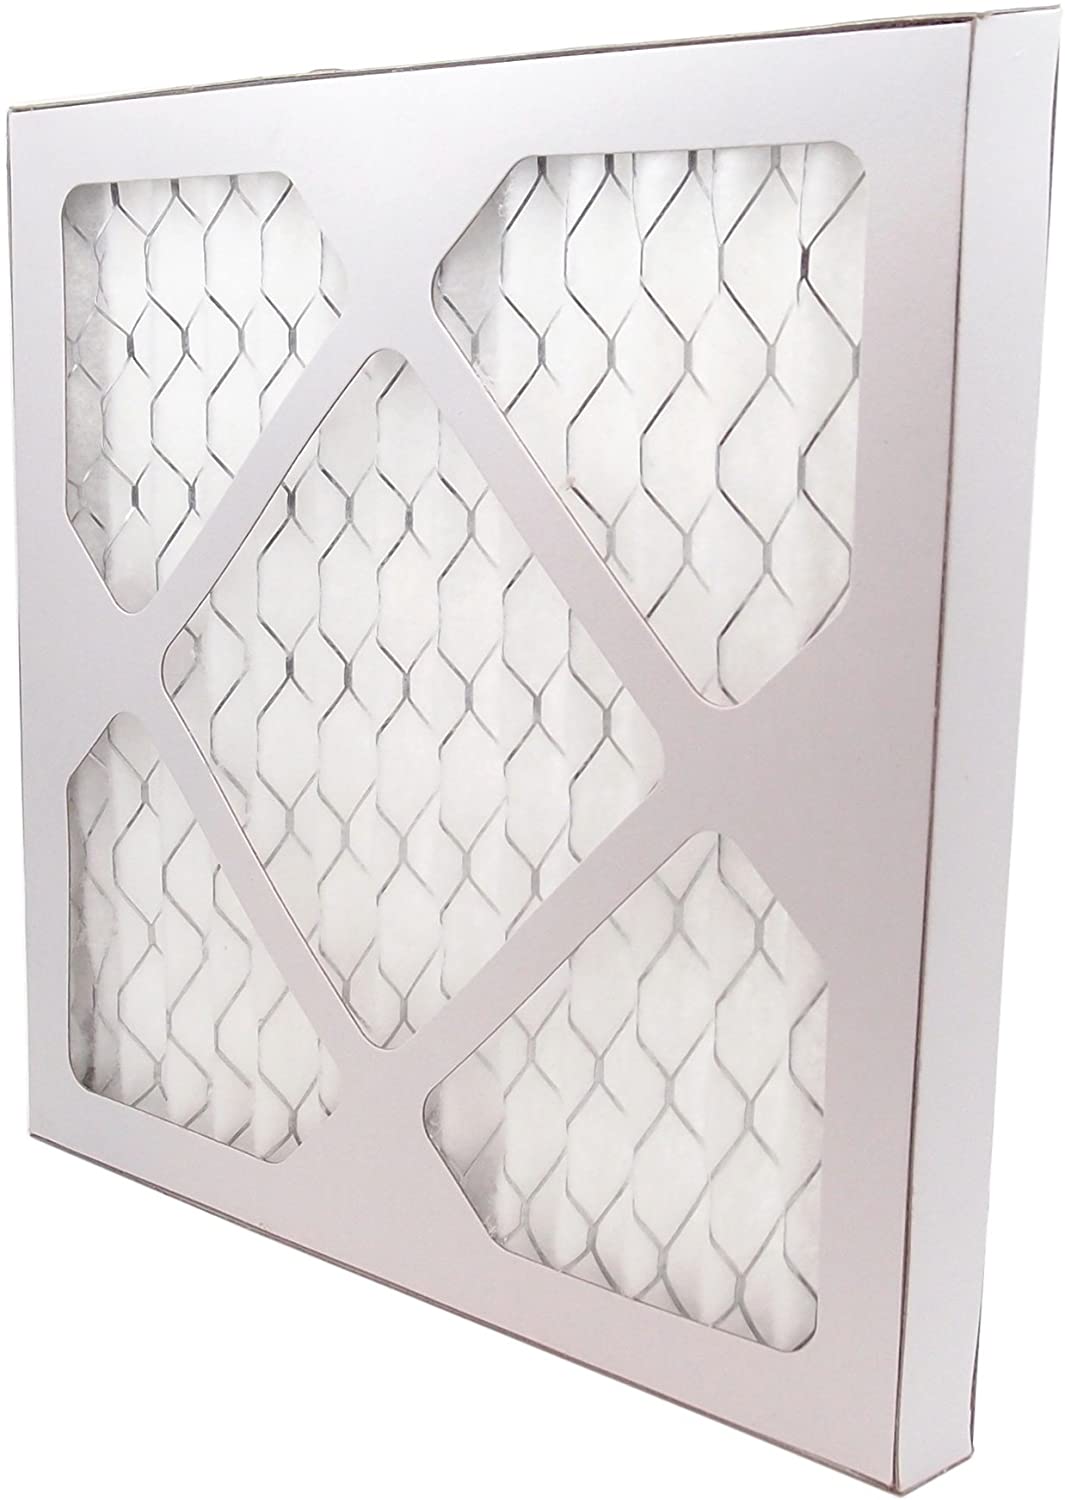 22&quot; x 22&quot; Pleated MERV 8 Filter for HVAC Return Filter Grille [Actual Dimensions: 21.75 X 21.75] 3-Pack